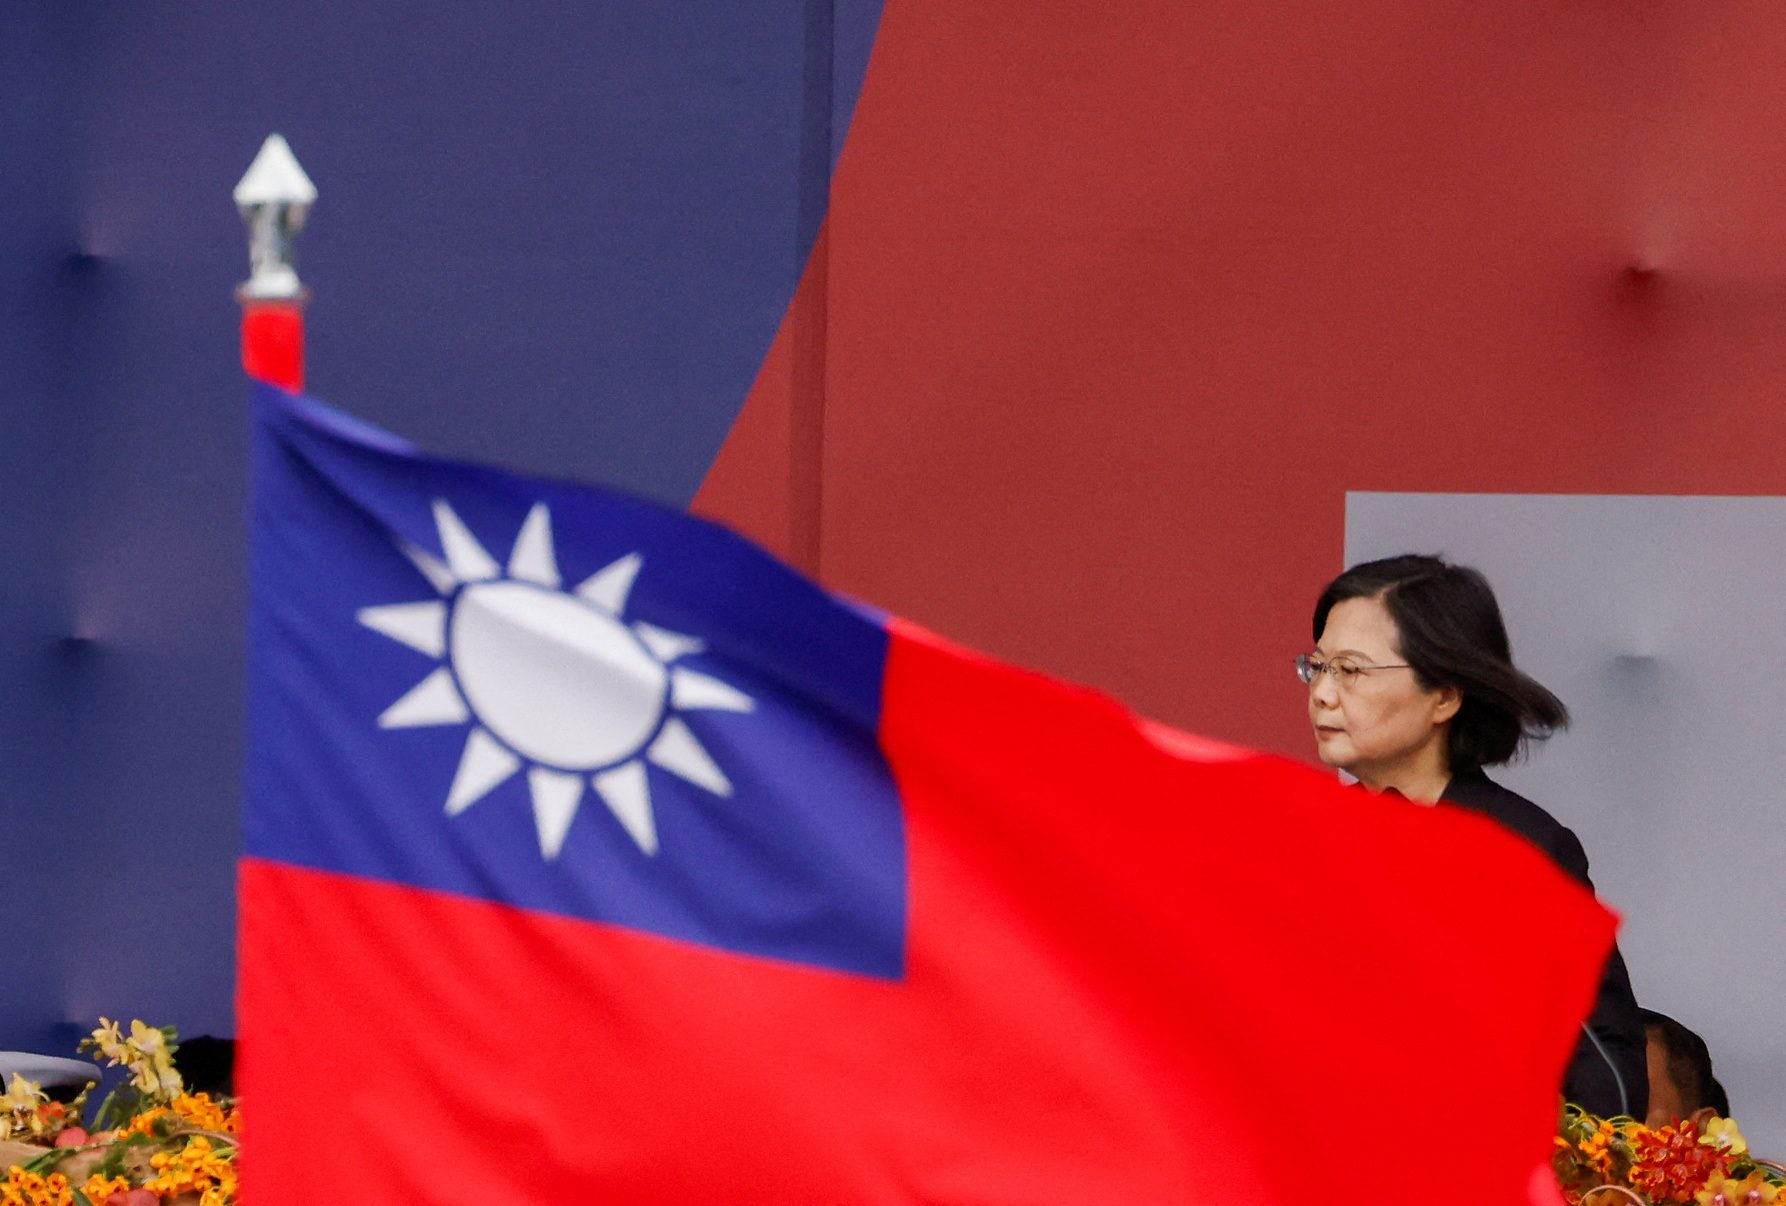 Taiwan president says ties with China must be decided by will of the people